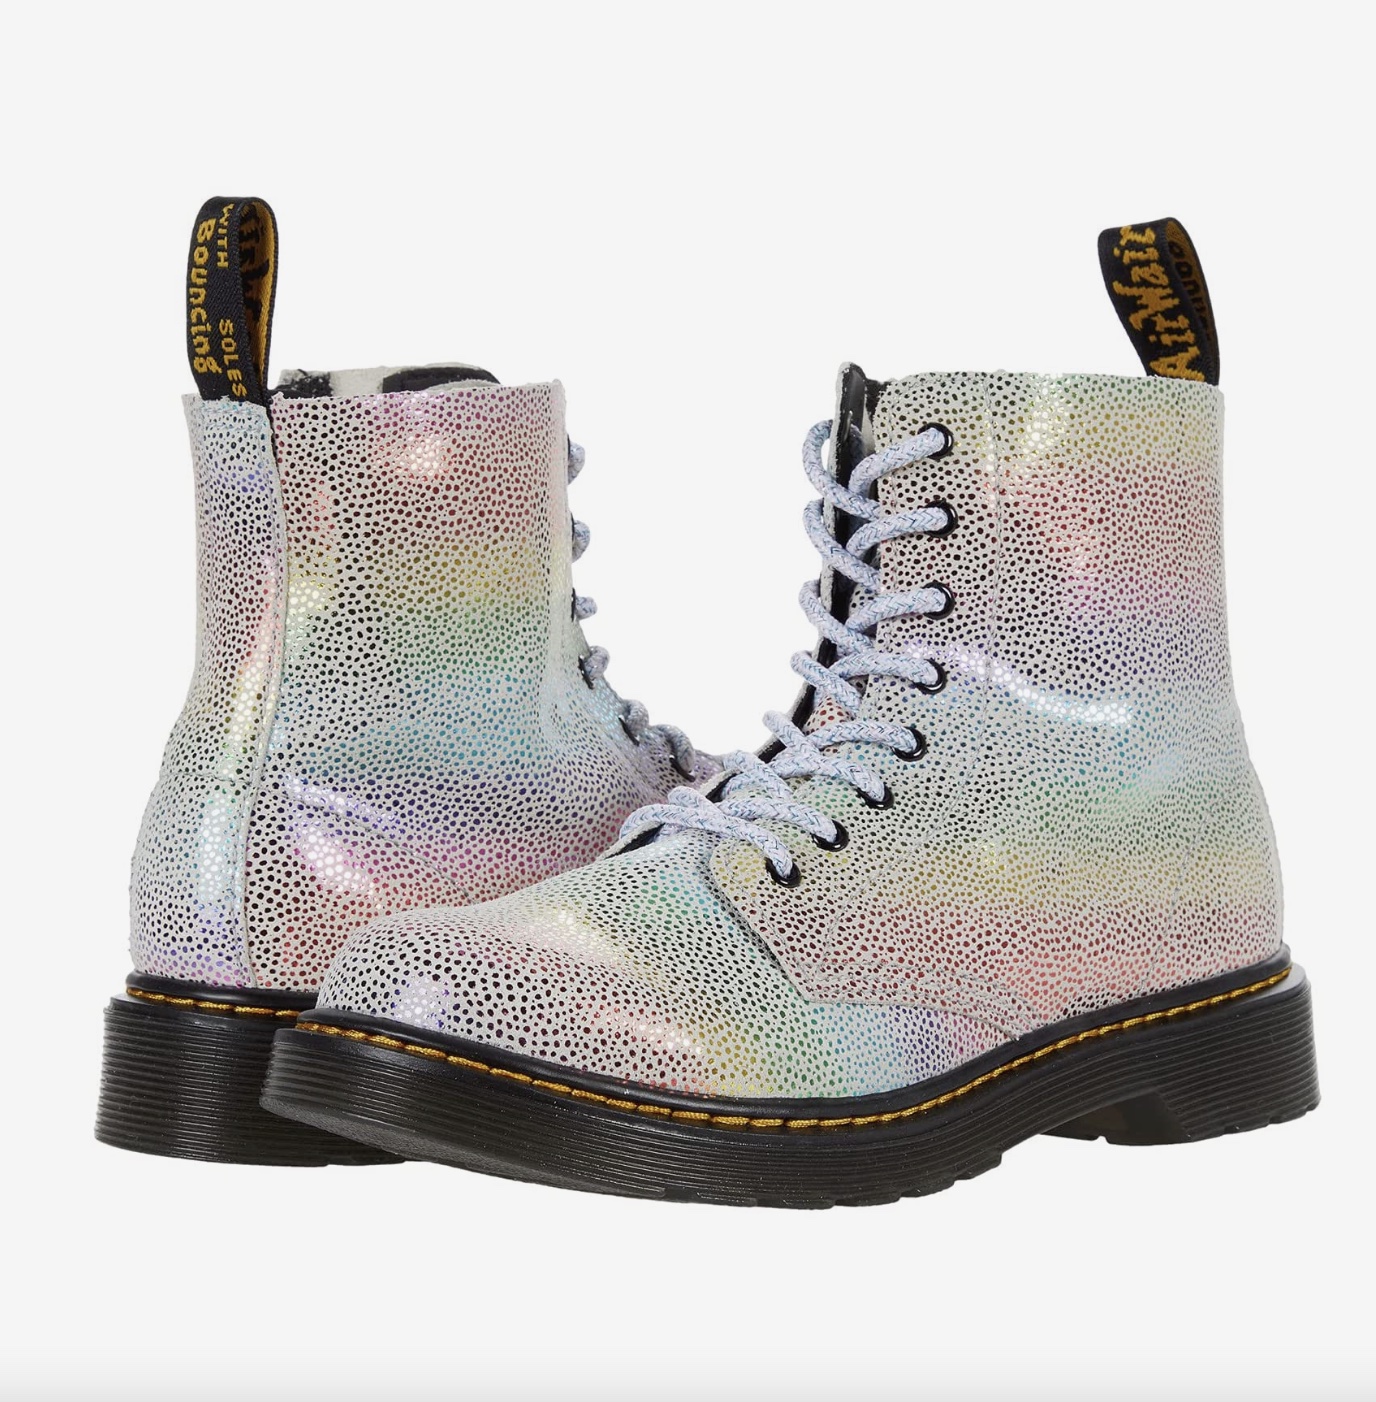 Cool gifts for tween girls: Doc Martens are always in style